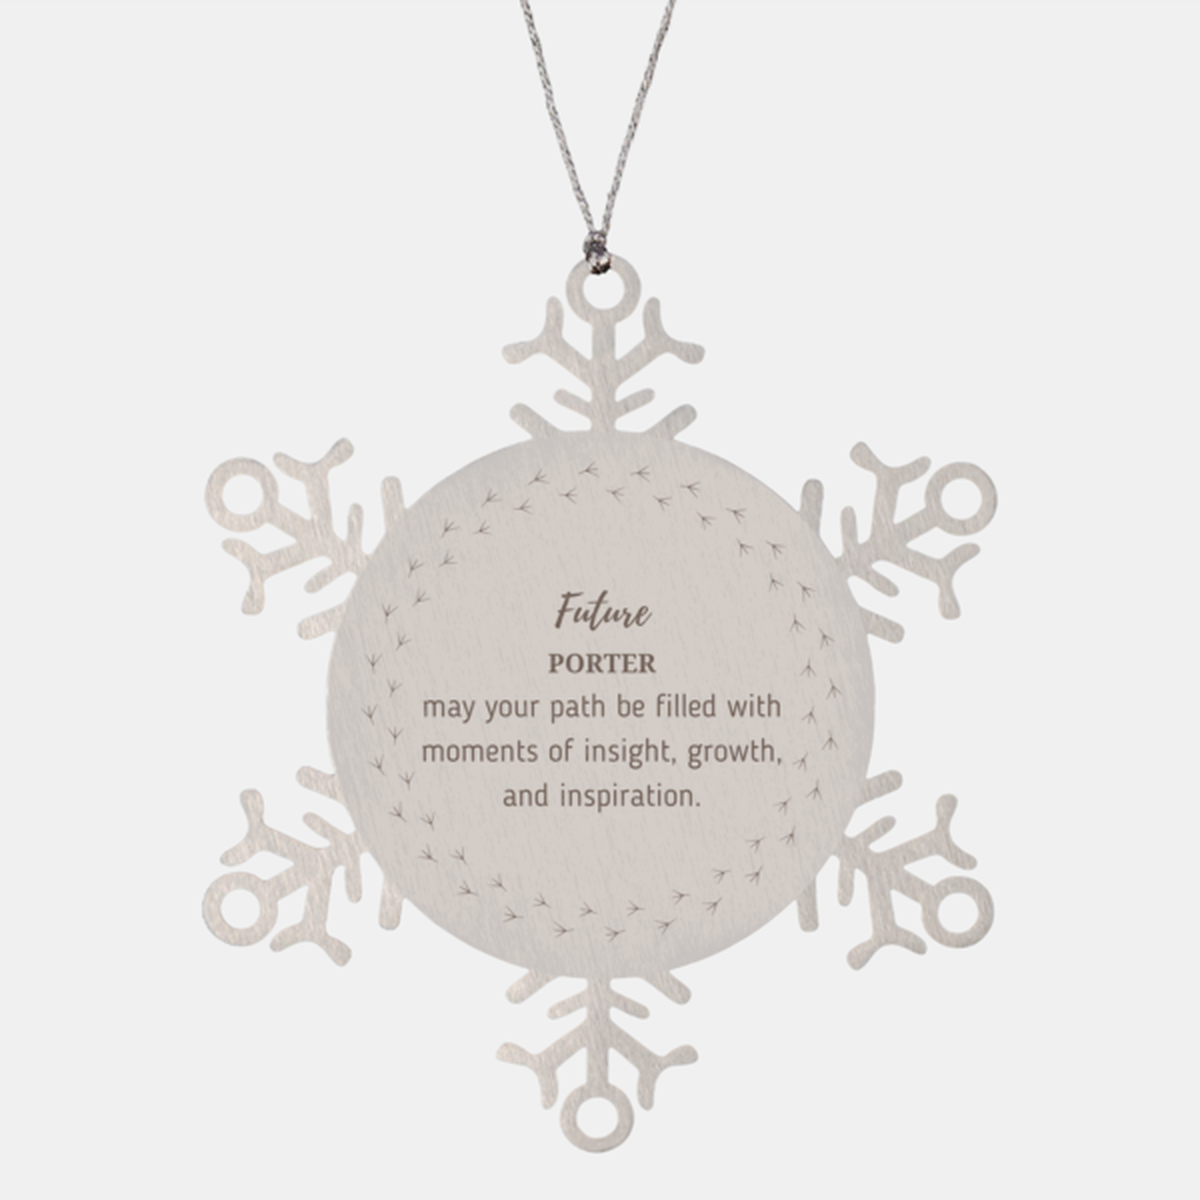 Future Porter Gifts, May your path be filled with moments of insight, Graduation Gifts for New Porter, Christmas Unique Snowflake Ornament For Men, Women, Friends